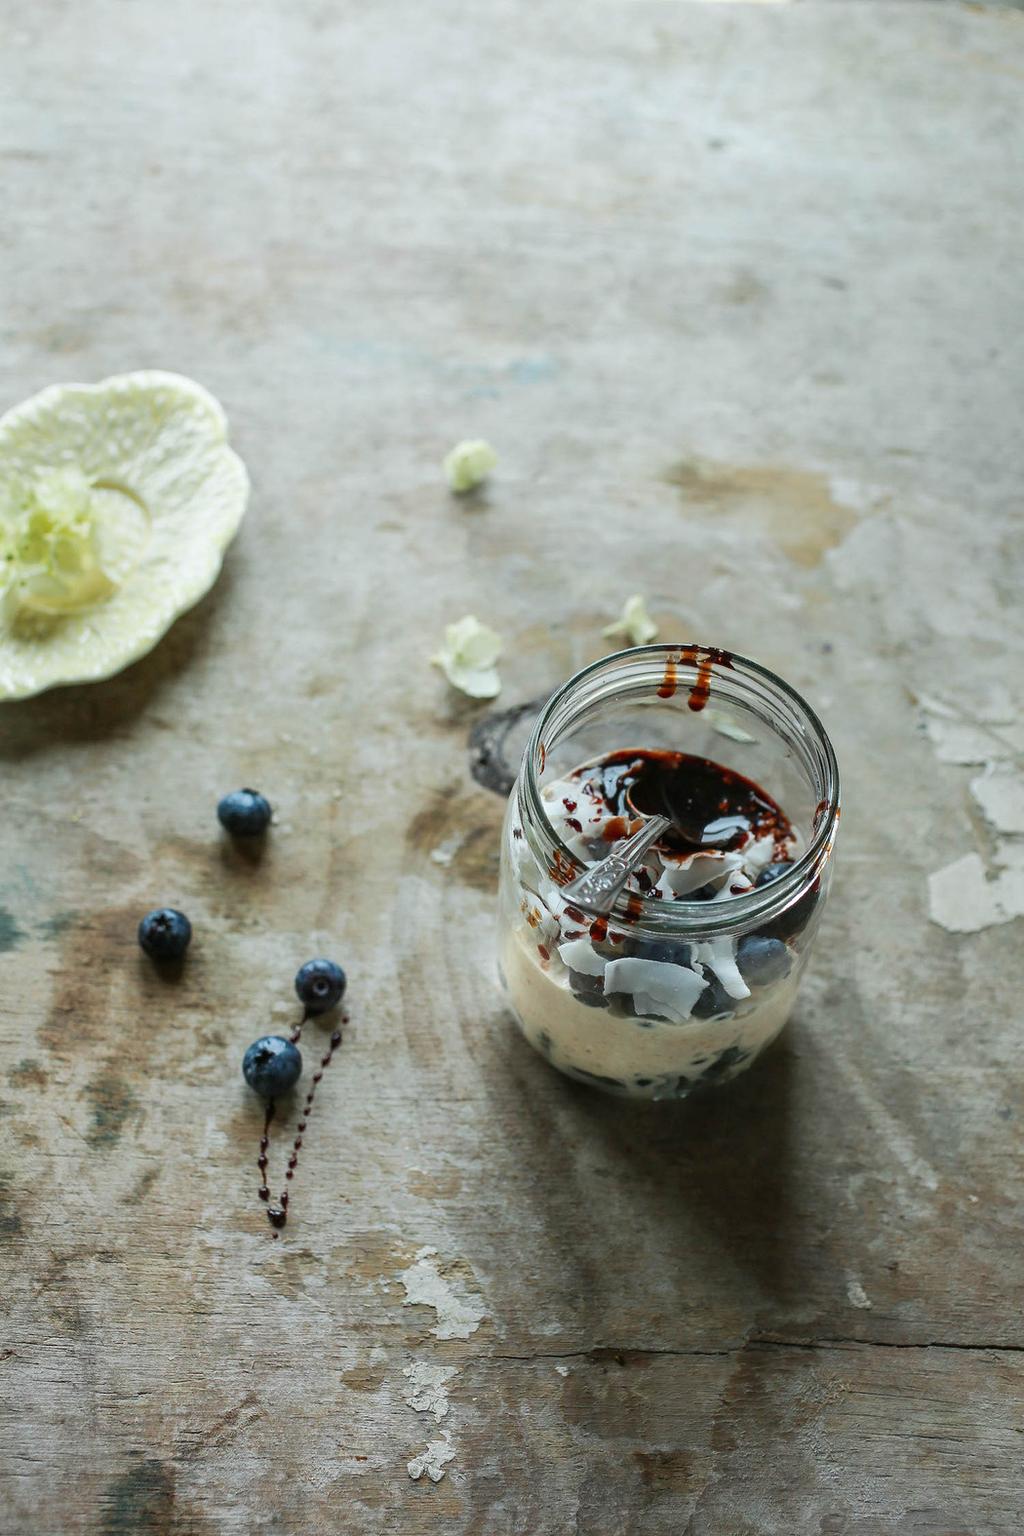 blueberry sesame overnight oats 1 serving 3/4 cup (75g) oats 3/4 cup (185ml) sesame milk or milk of your choice small handful of blueberries couple spoons of coconut chips a drizzle